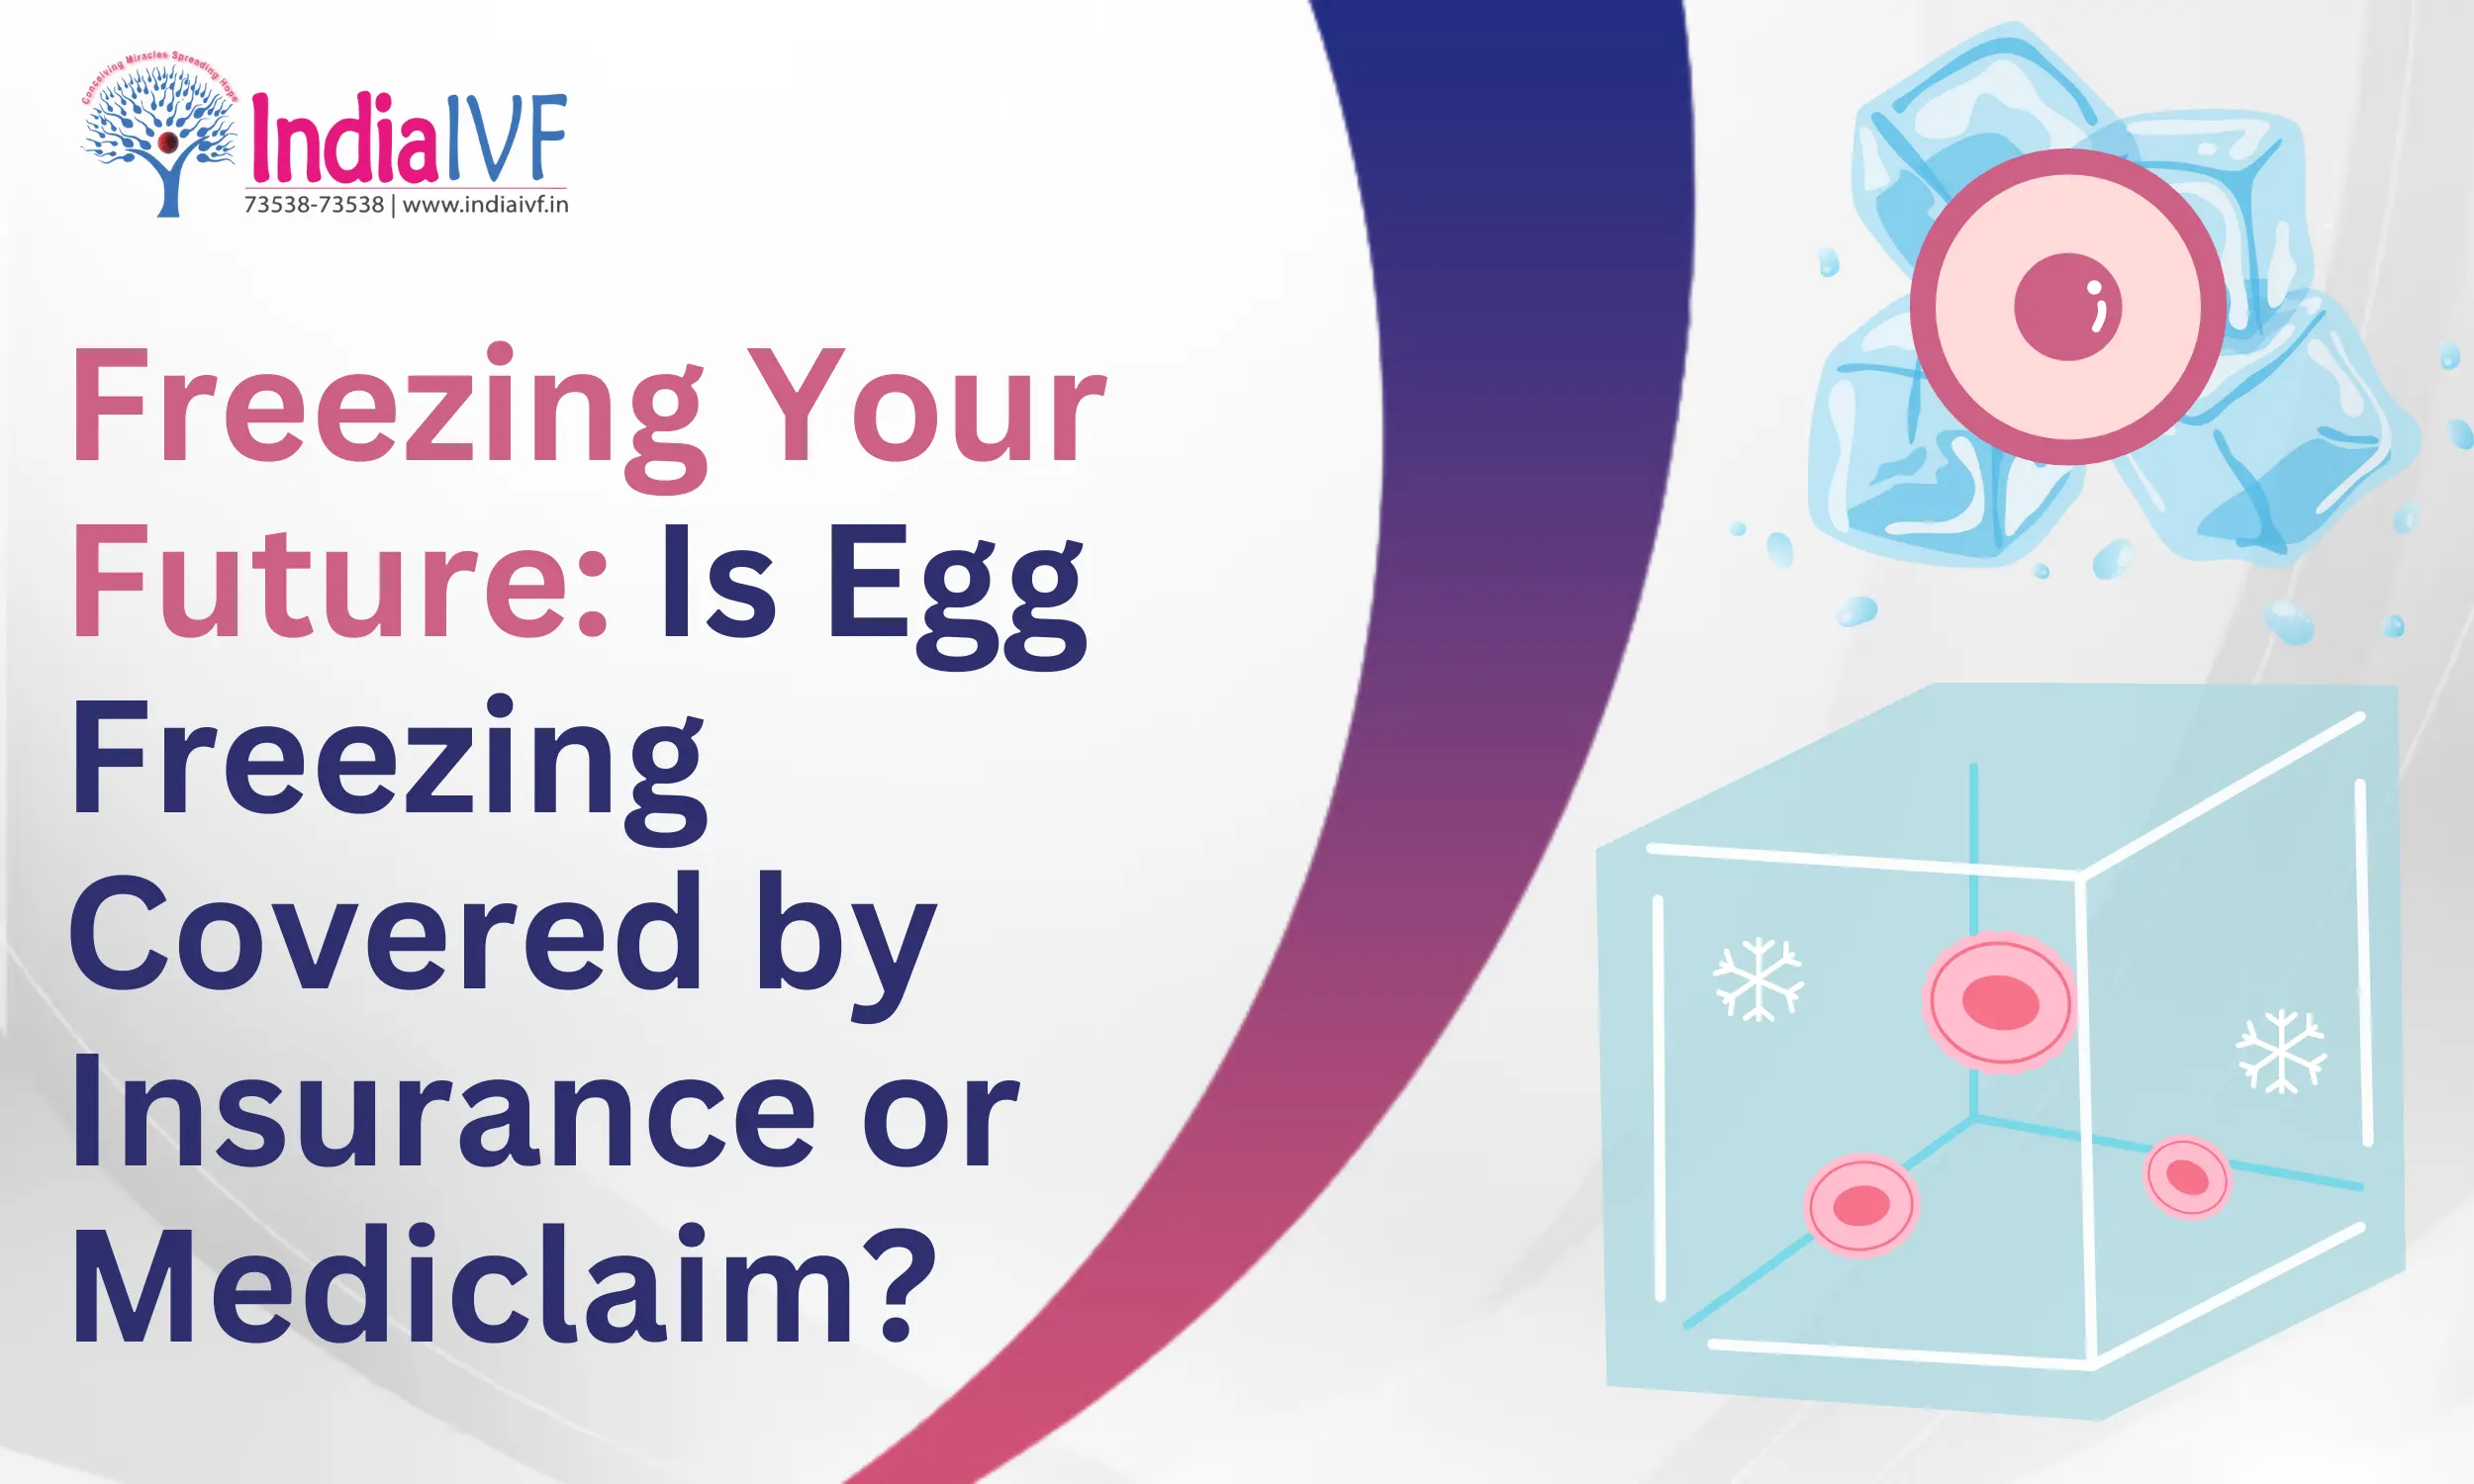 How Much is the Egg Freezing Cost in Delhi